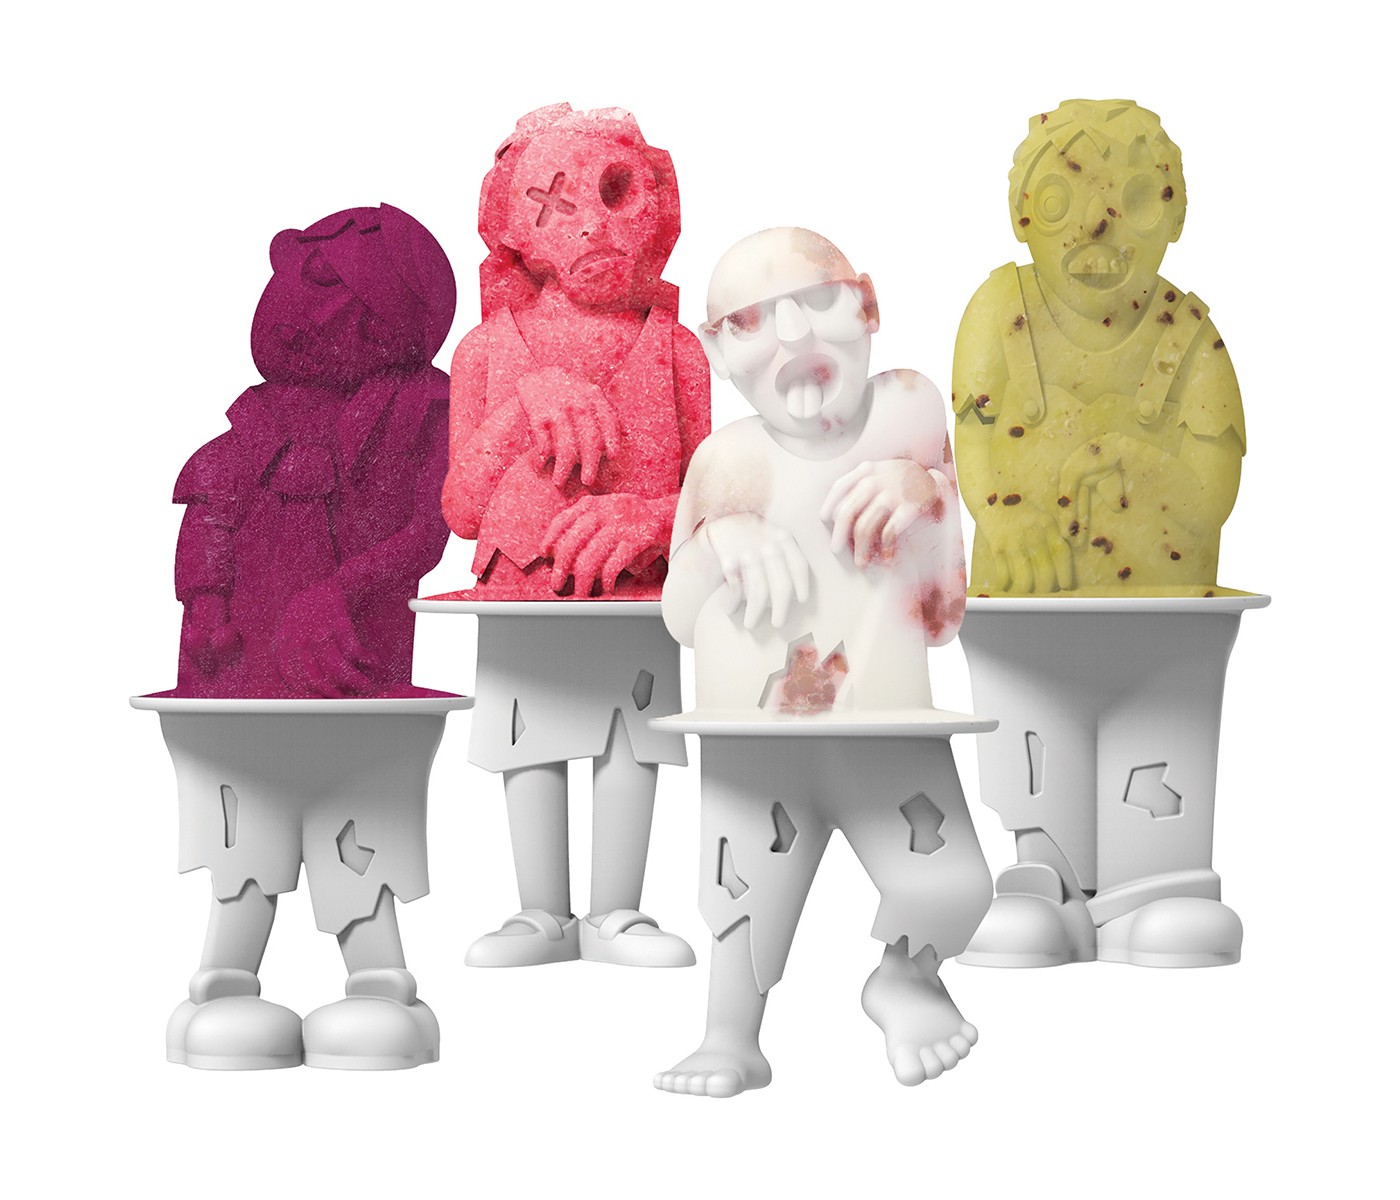 Cool kids' gifts under $15: Zombie ice pop mold